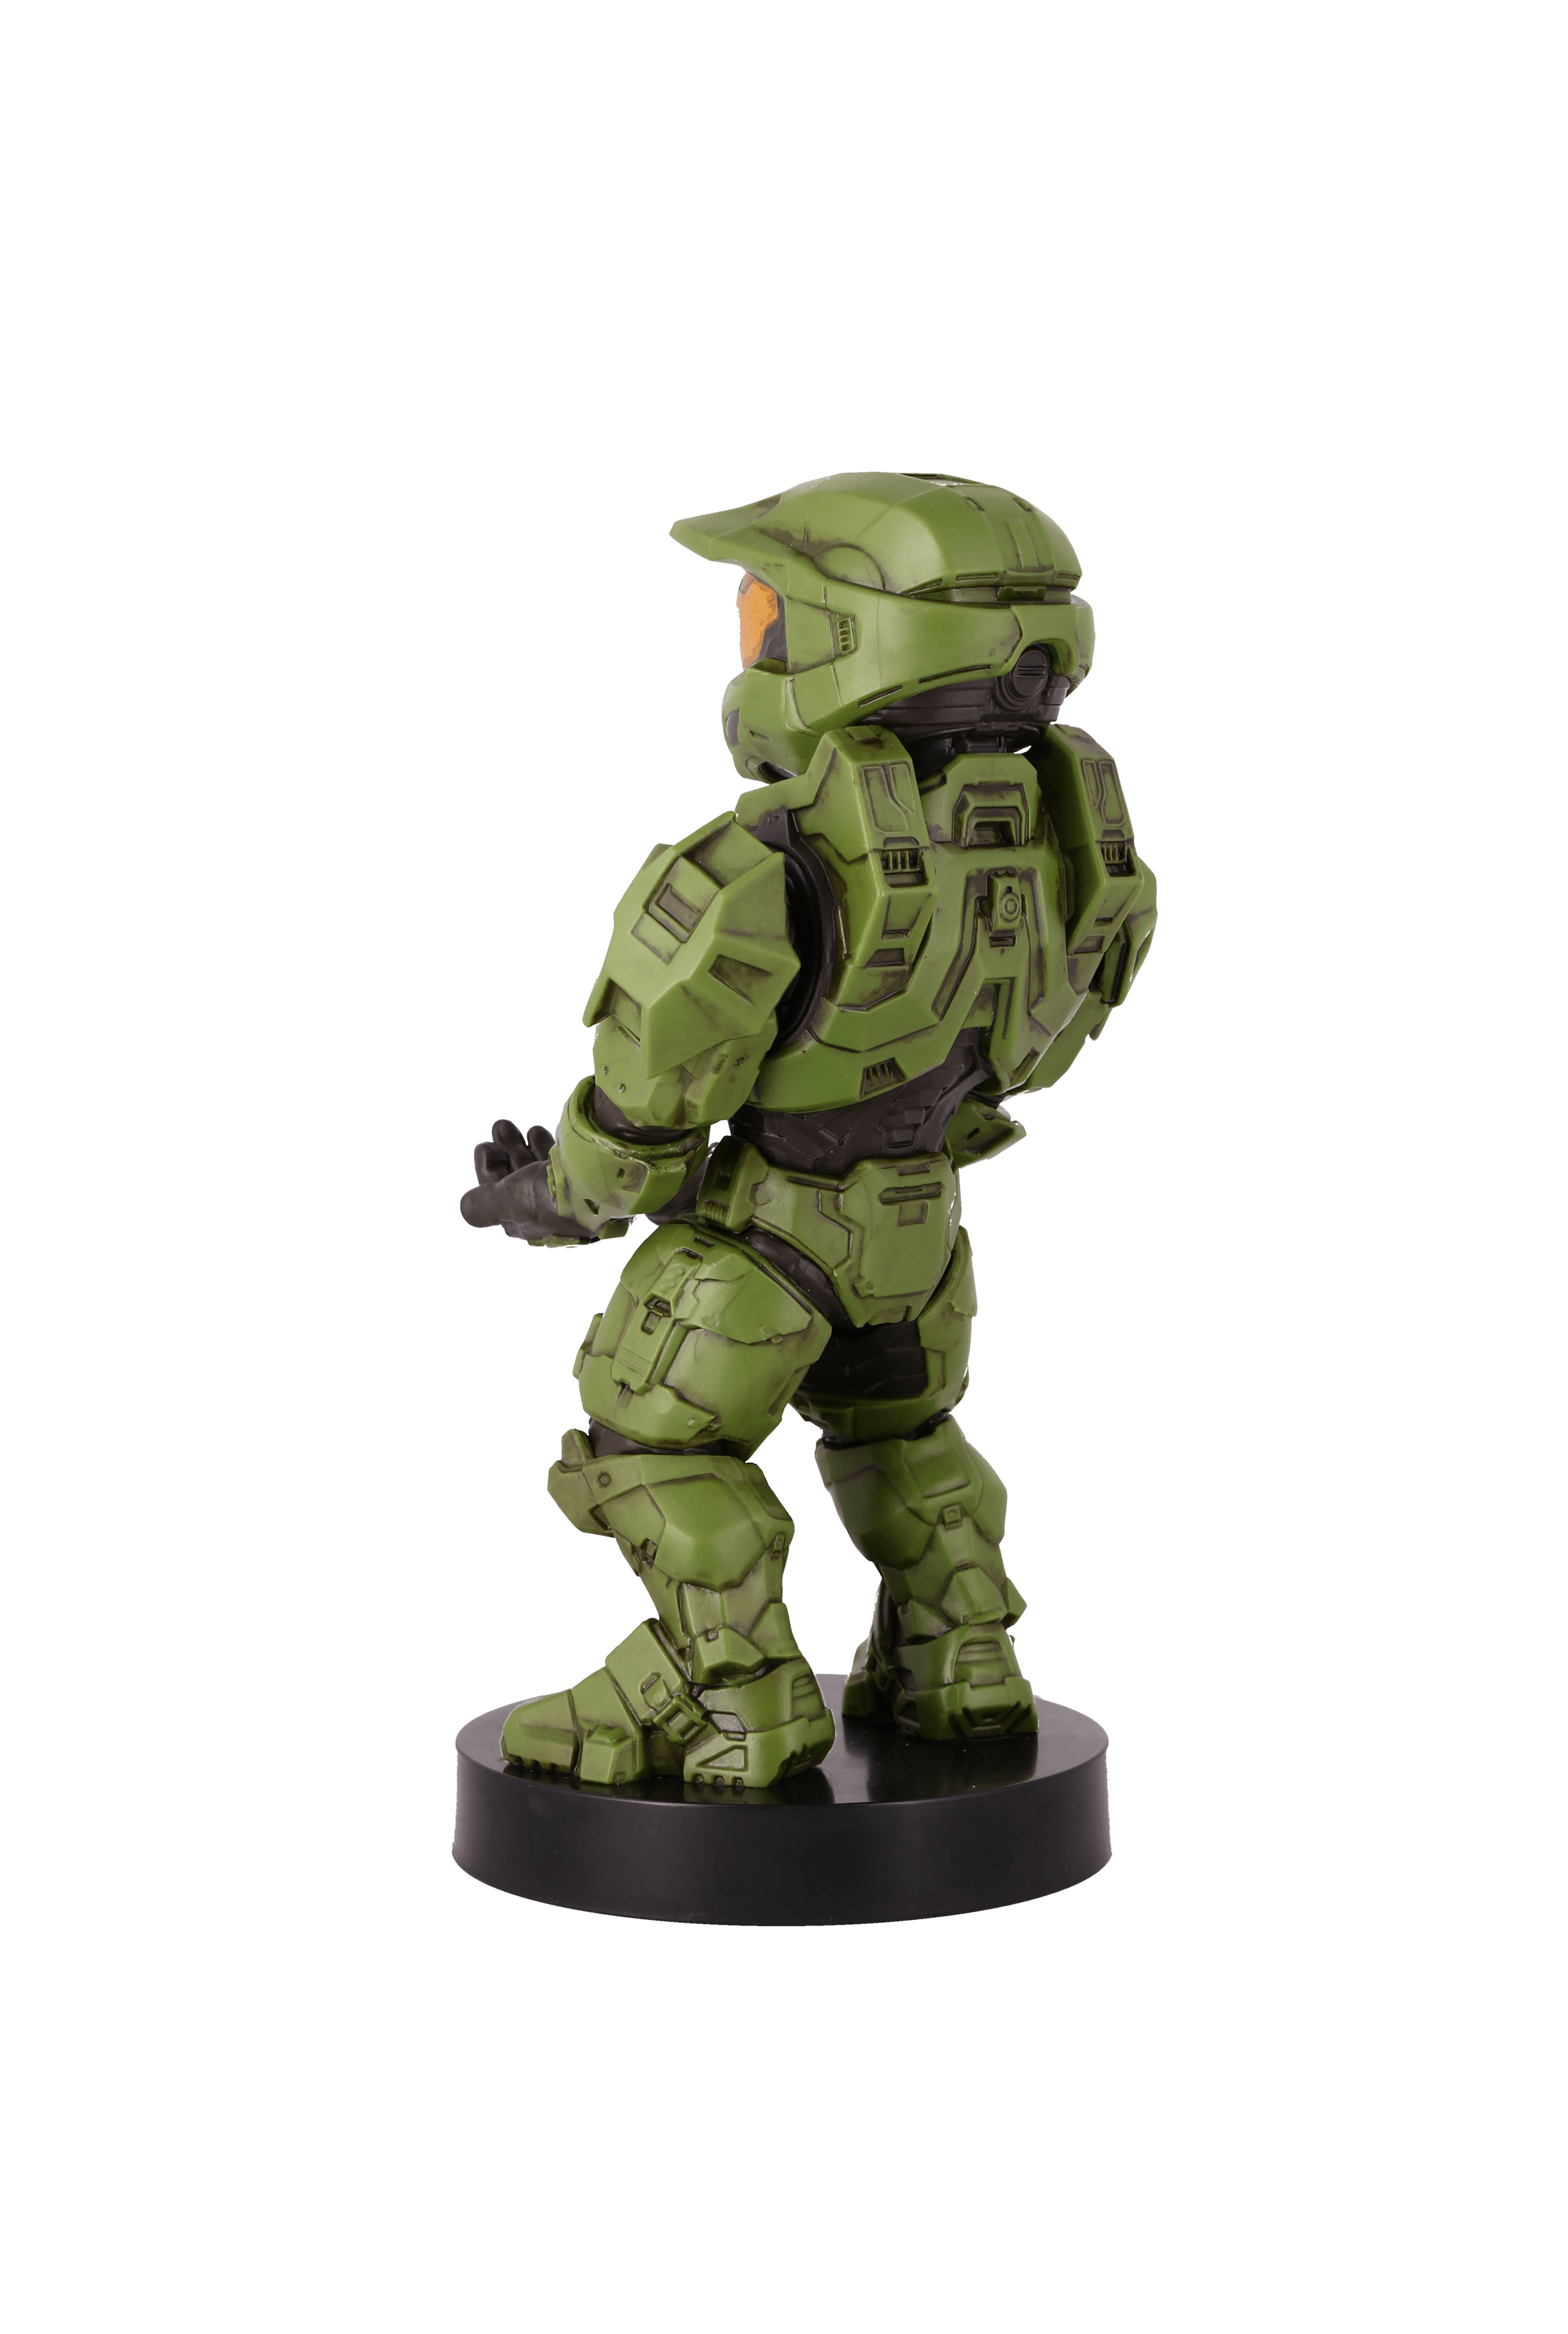 Cable Guys - Halo Infinite - Master Chief - Phone & Controller Holder - The Card Vault